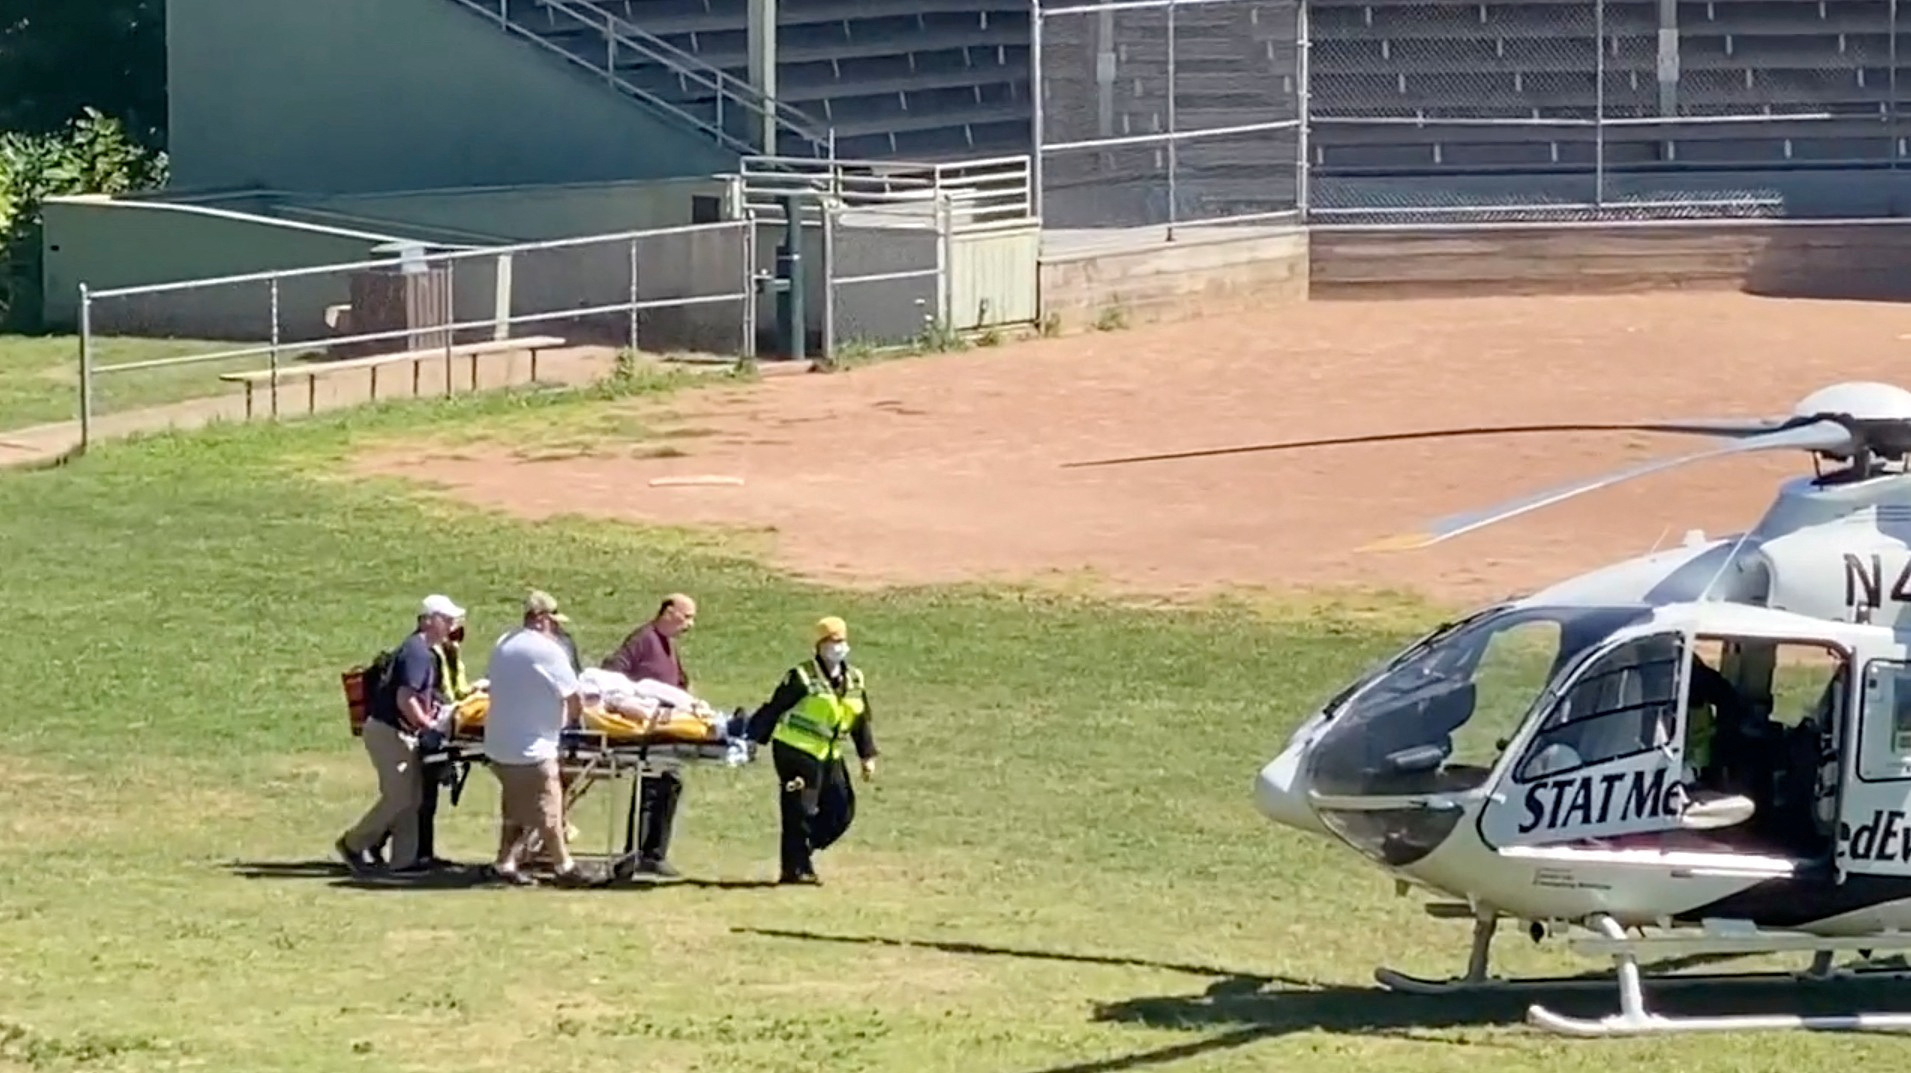 Writer Salman Rushdie was taken to helicopter after being stabbed at Chautauqua Institute